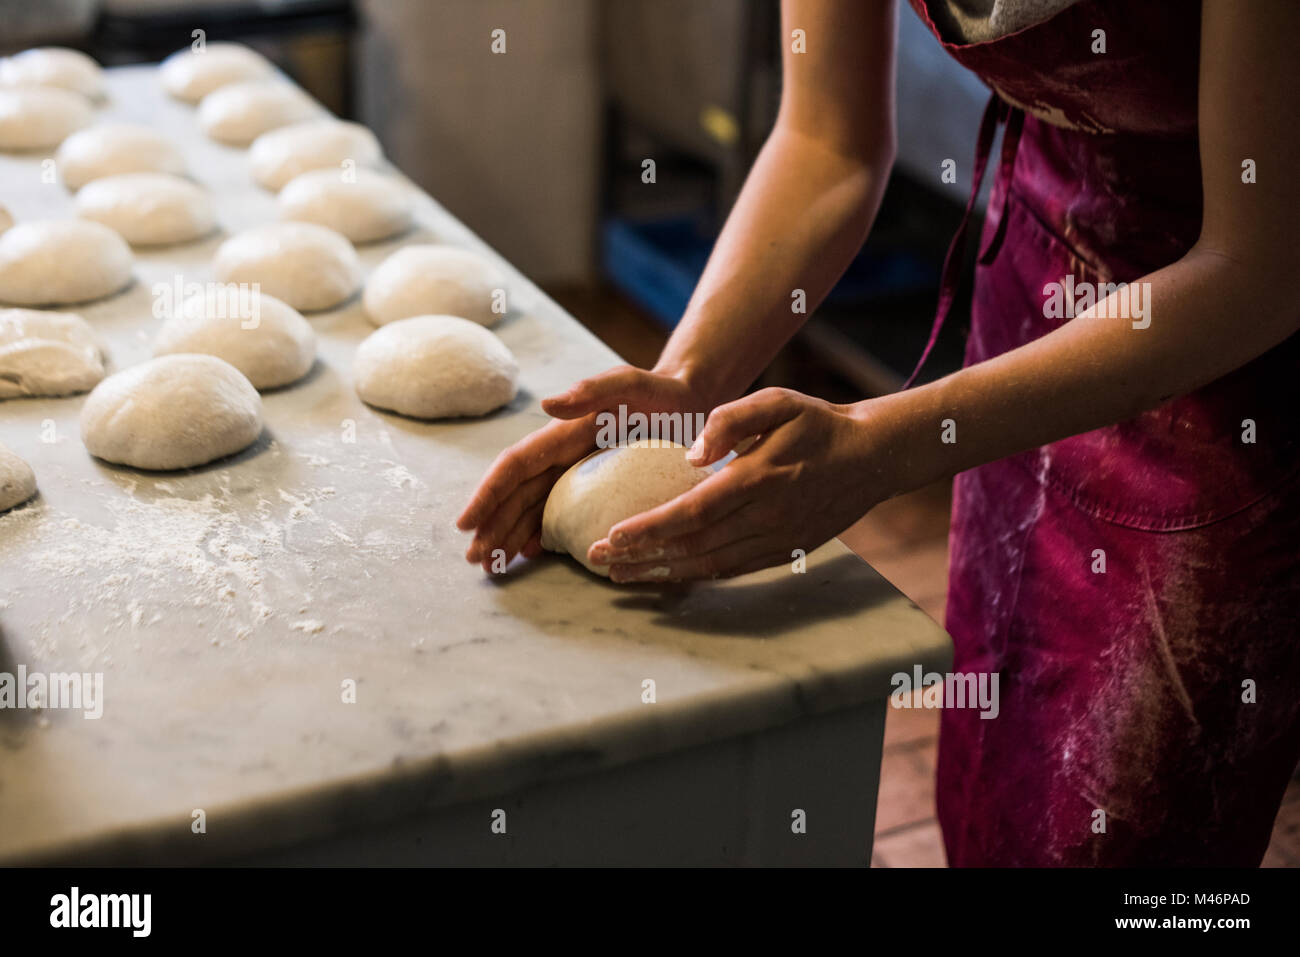 Woman in apron shaping pizza dough Stock Photo